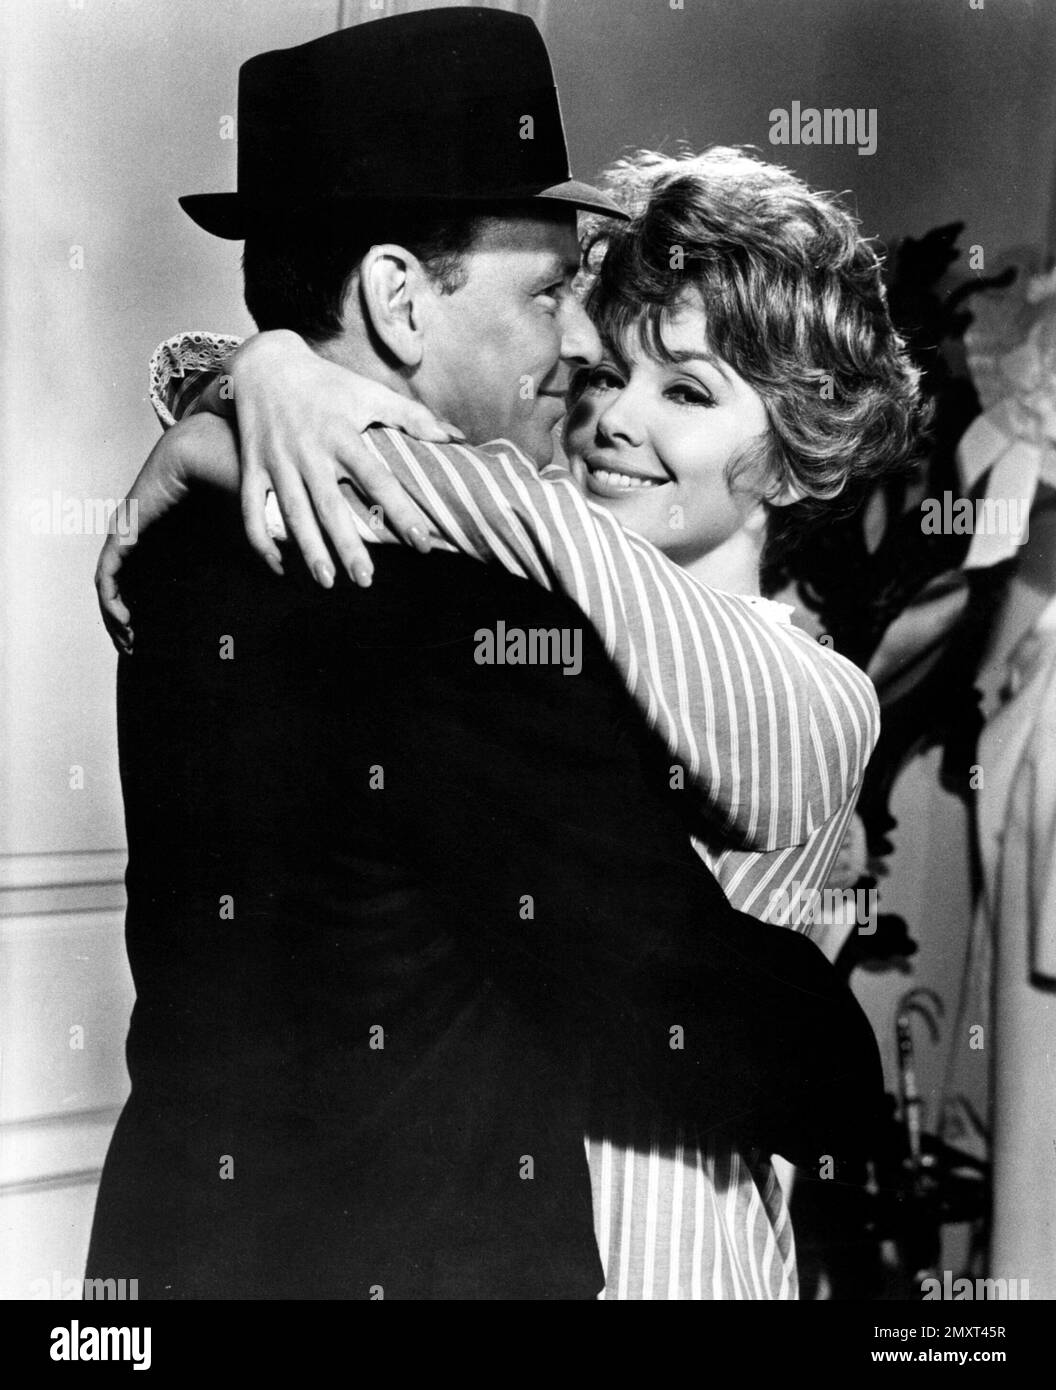 JILL ST. JOHN and FRANK SINATRA in COME BLOW YOUR HORN (1963), directed by BUD YORKIN. Credit: PARAMOUNT PICTURES / Album Stock Photo